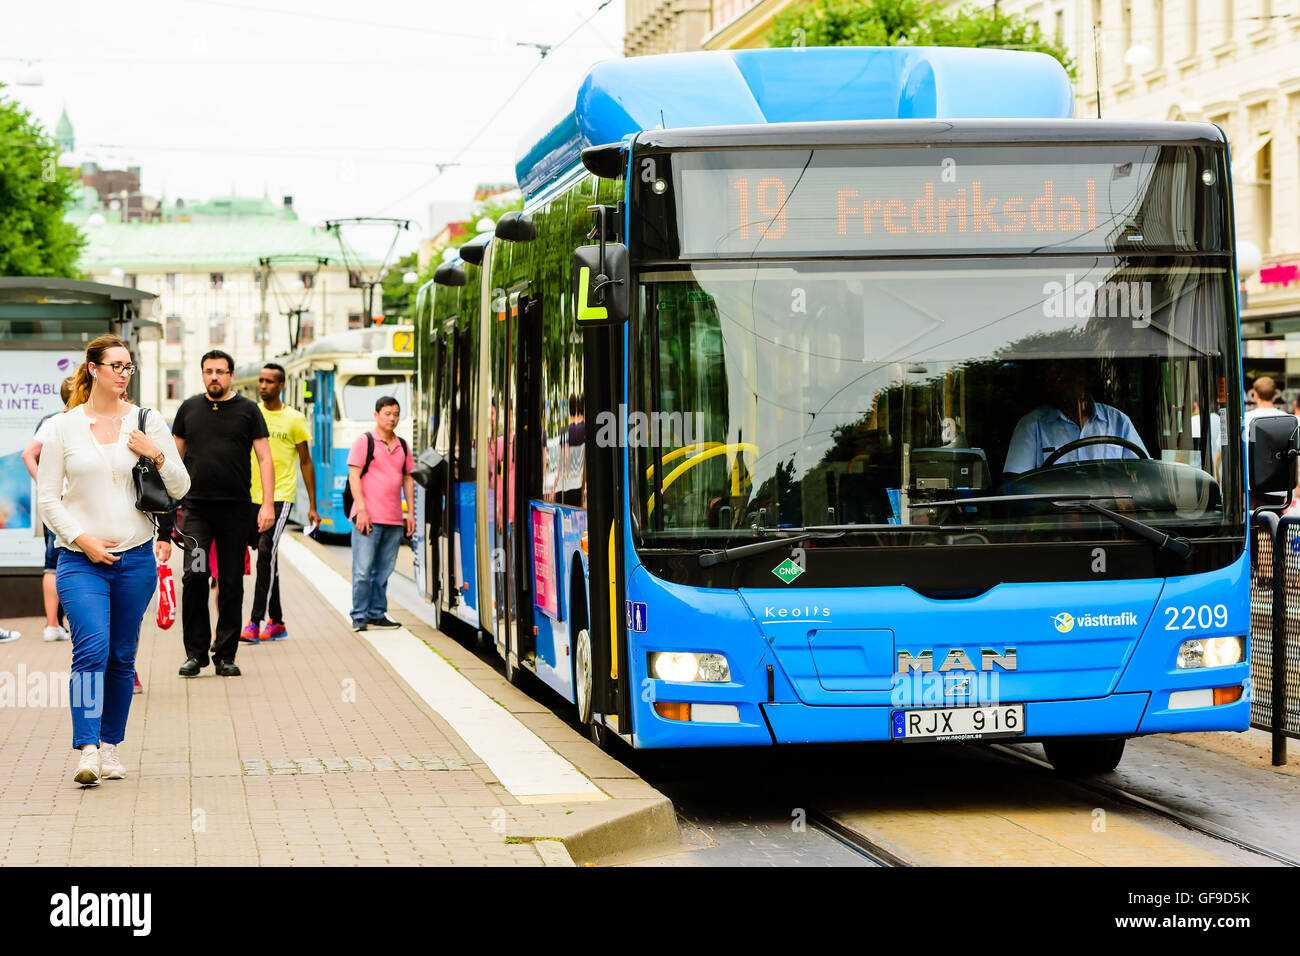 Goteborg, Sweden - July 25, 2016: Real people in everyday life. A blue compressed natural gas (CNG) fueled bus has stopped to le Stock Photo